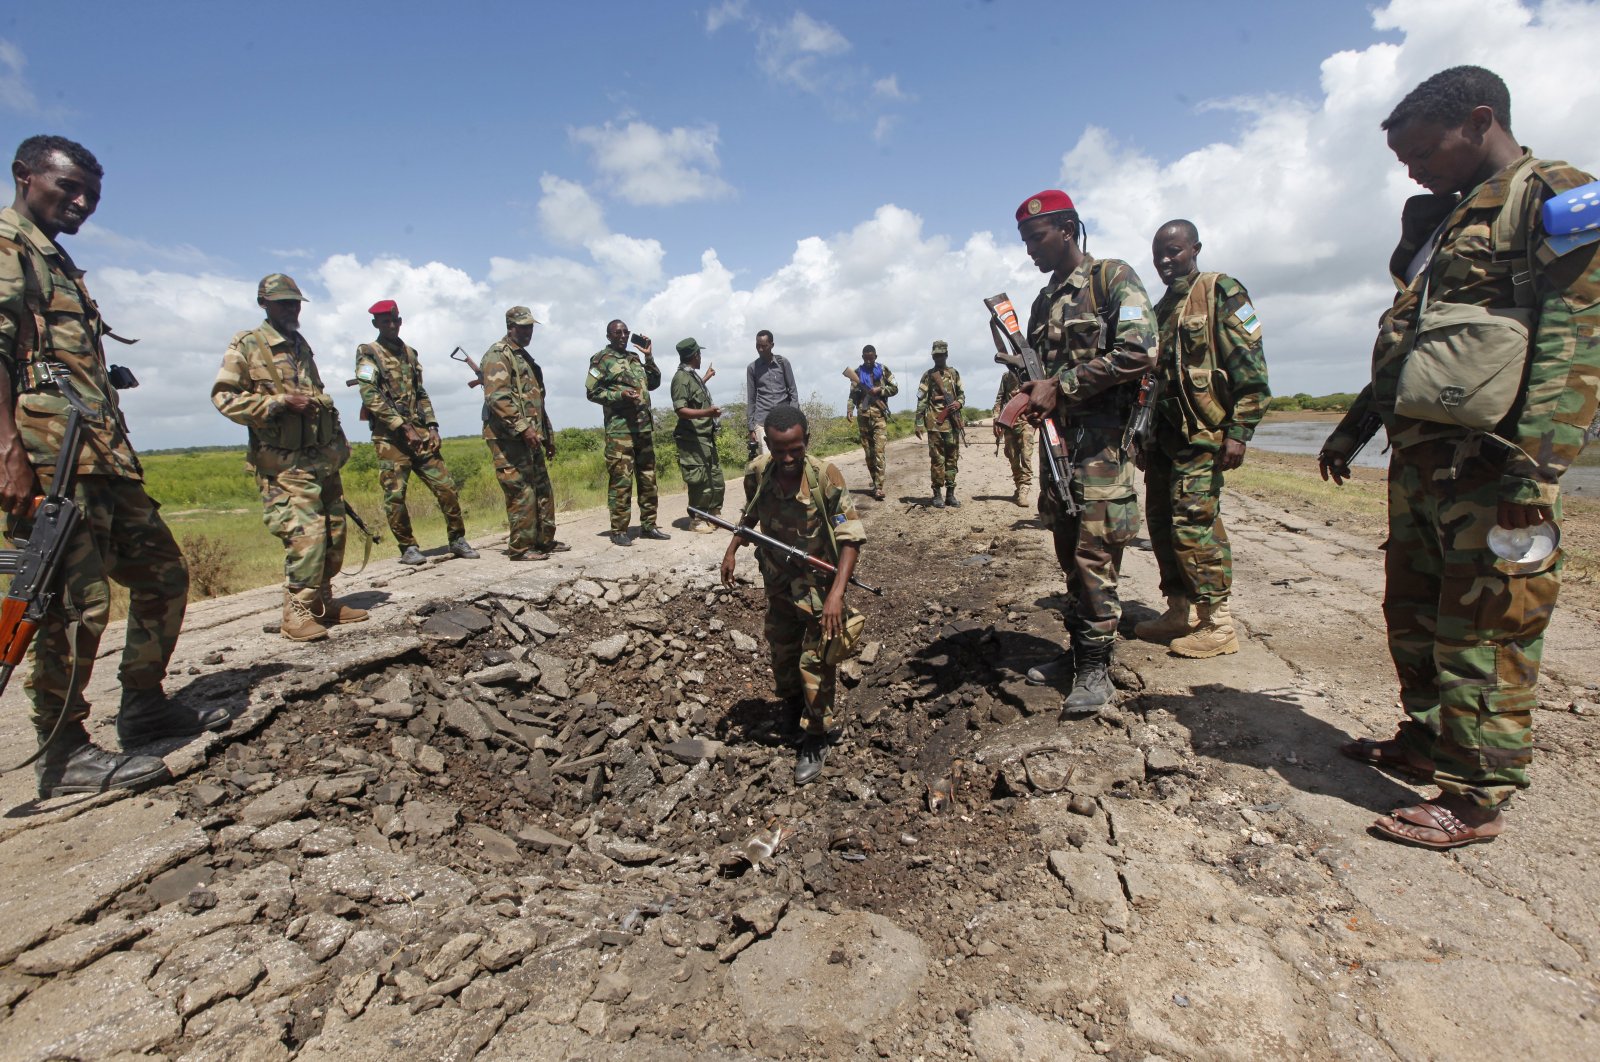 Somali soldiers stand at a Somali military base, near the site of an attack by al-Shabab in which a US soldier was killed and four others were injured in Somalia, Wednesday, June 13, 2018. (AP Photo/Farah Abdi Warsameh, File)